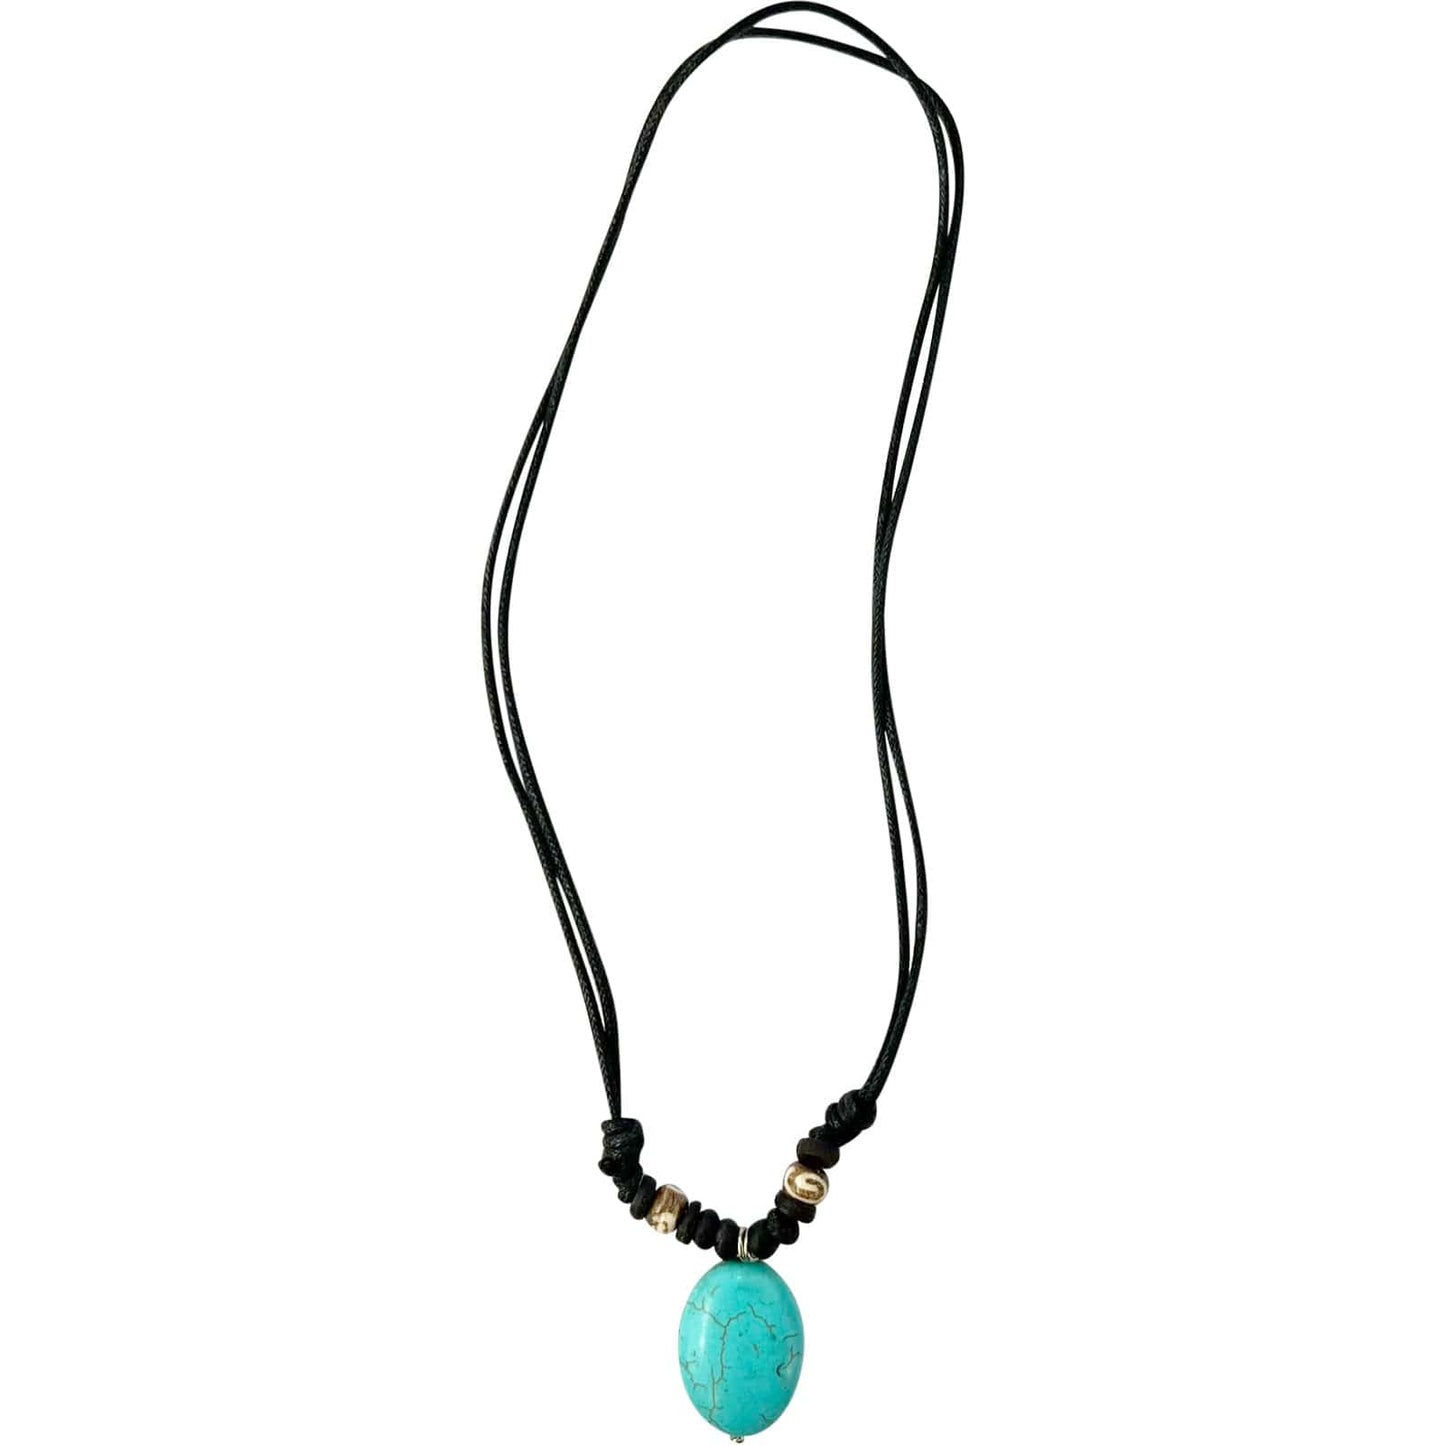 Turquoise Pendant Beads Necklace Black Cotton Cord Chain Mens Womens Jewellery